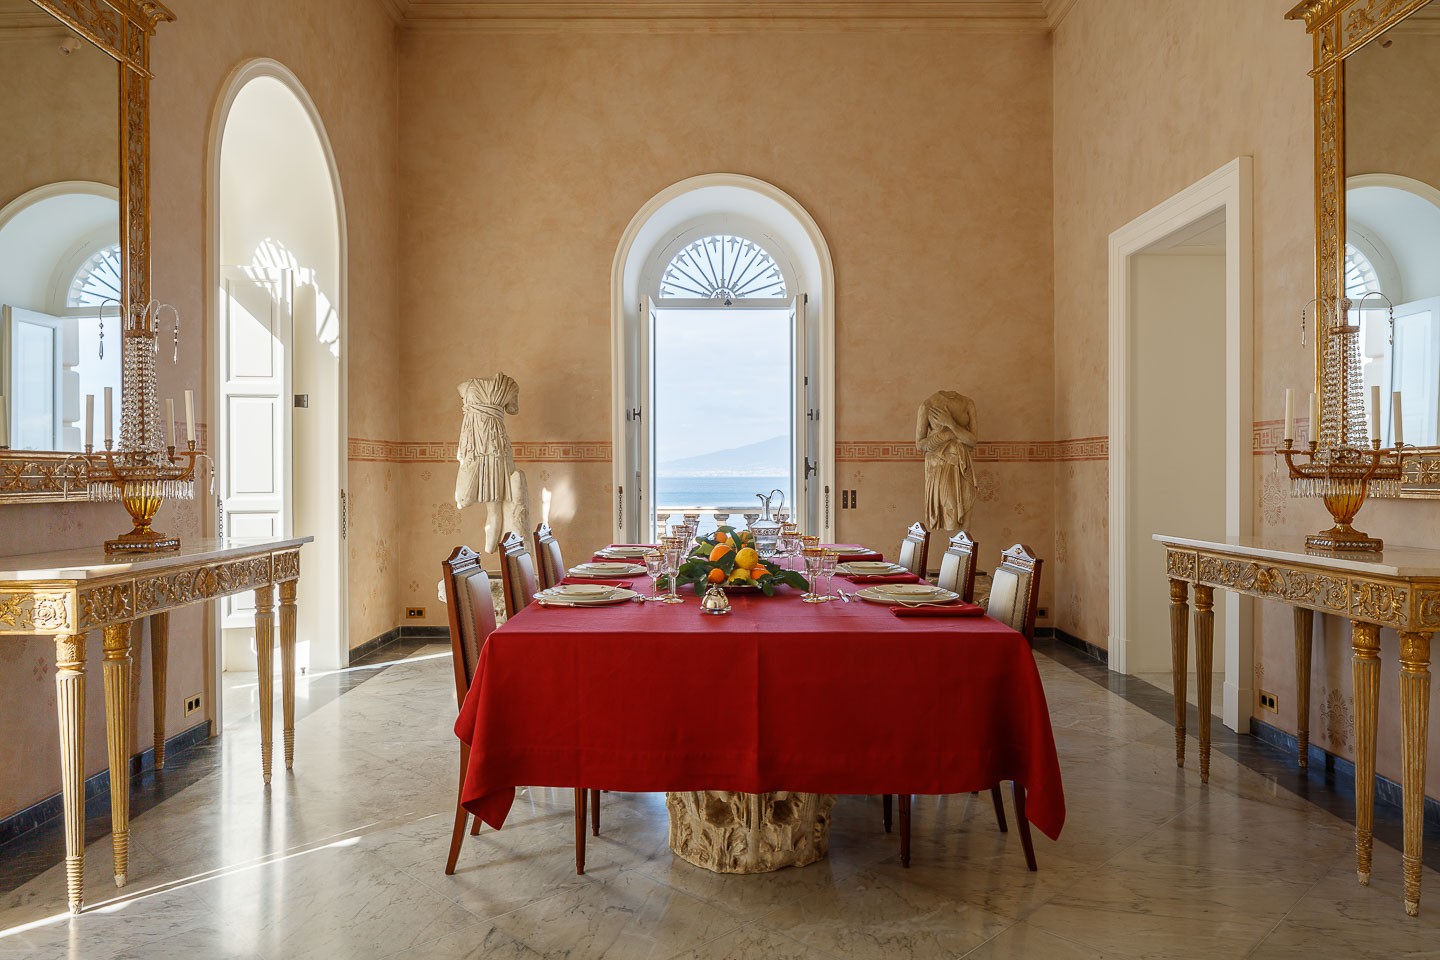 Villa Astor luxury property available for exclusive rent rental destination ices accommodation best dining room table settings The Heritage Collection